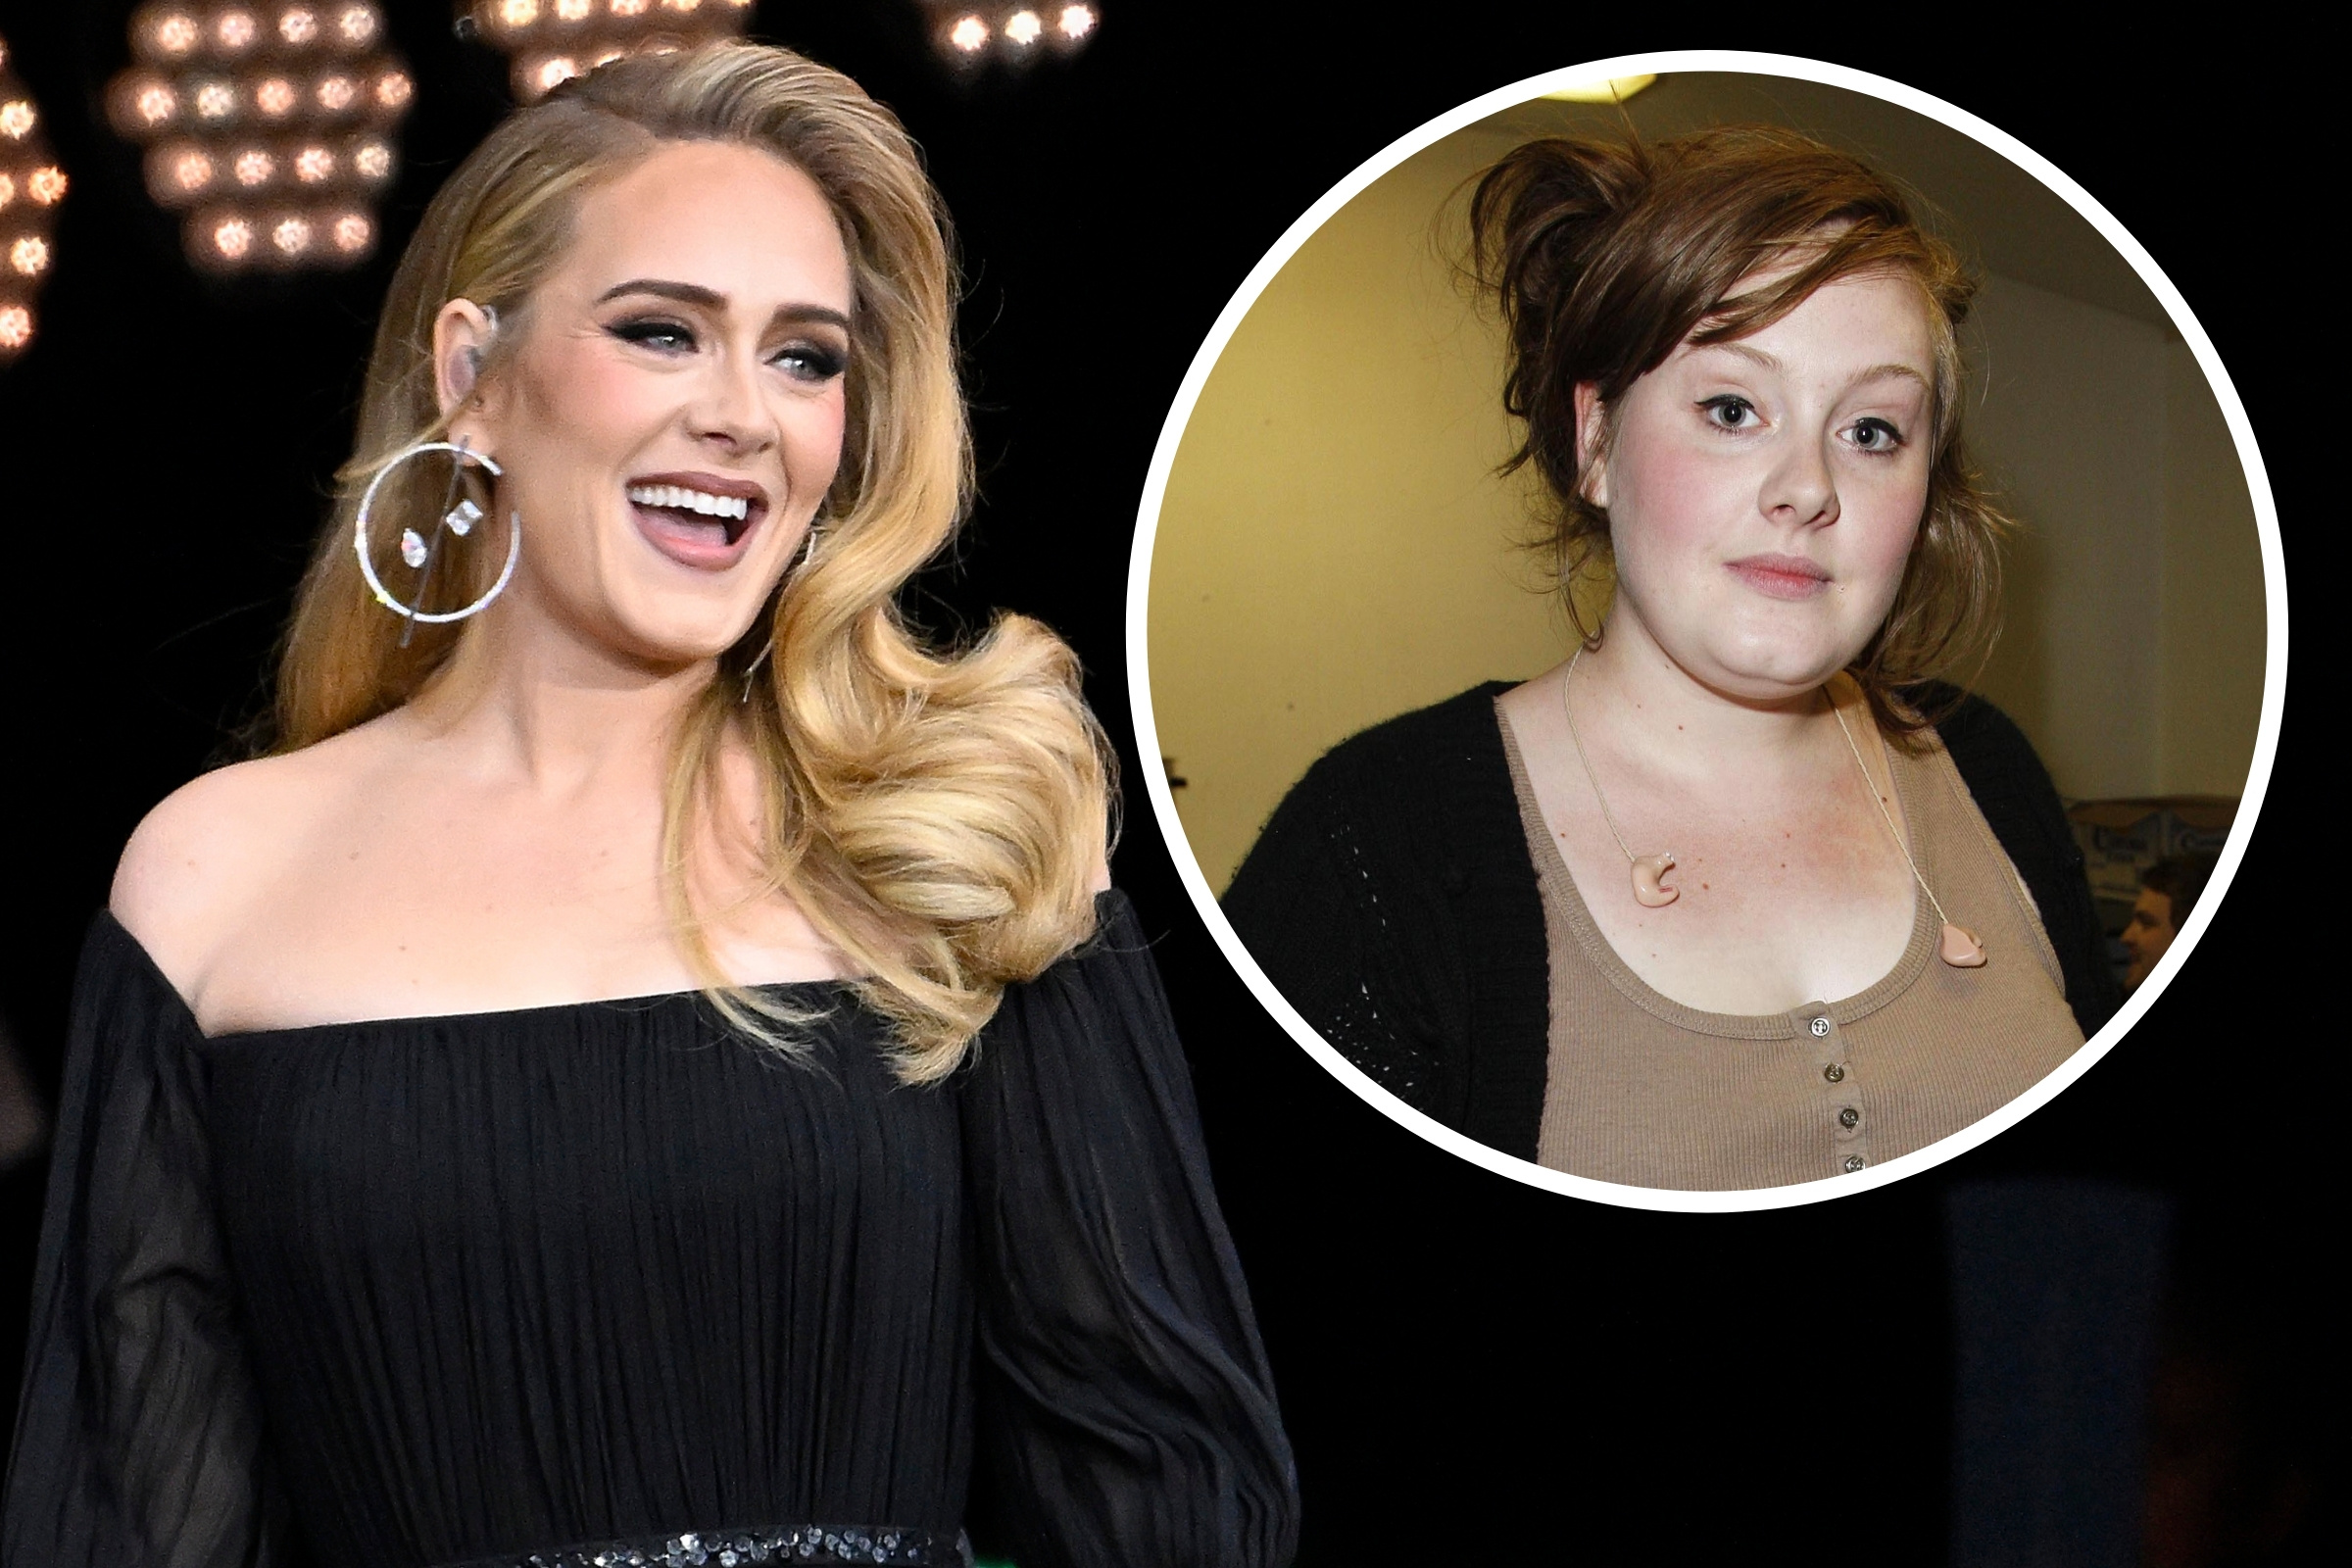 Adele Reveals Backlash From Weight Loss, Says Some Fans Felt 'Betrayed'